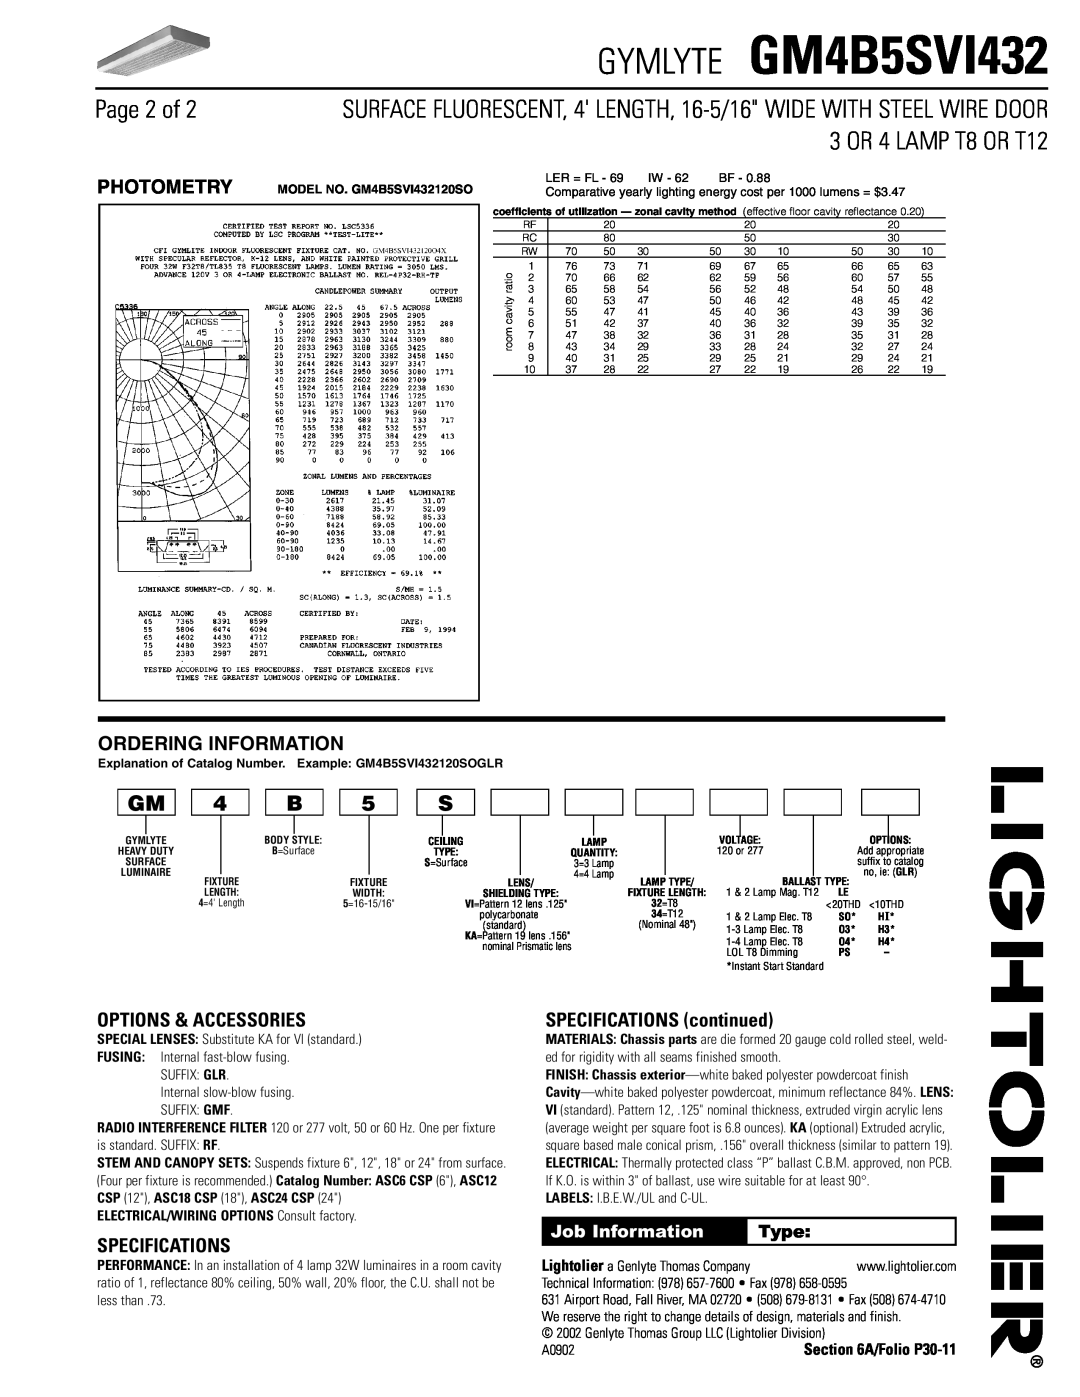 Lightolier GM4B5SVI432 Page 2 of, Photometry, Ordering Information, Options & Accessories, Specifications, Job Information 